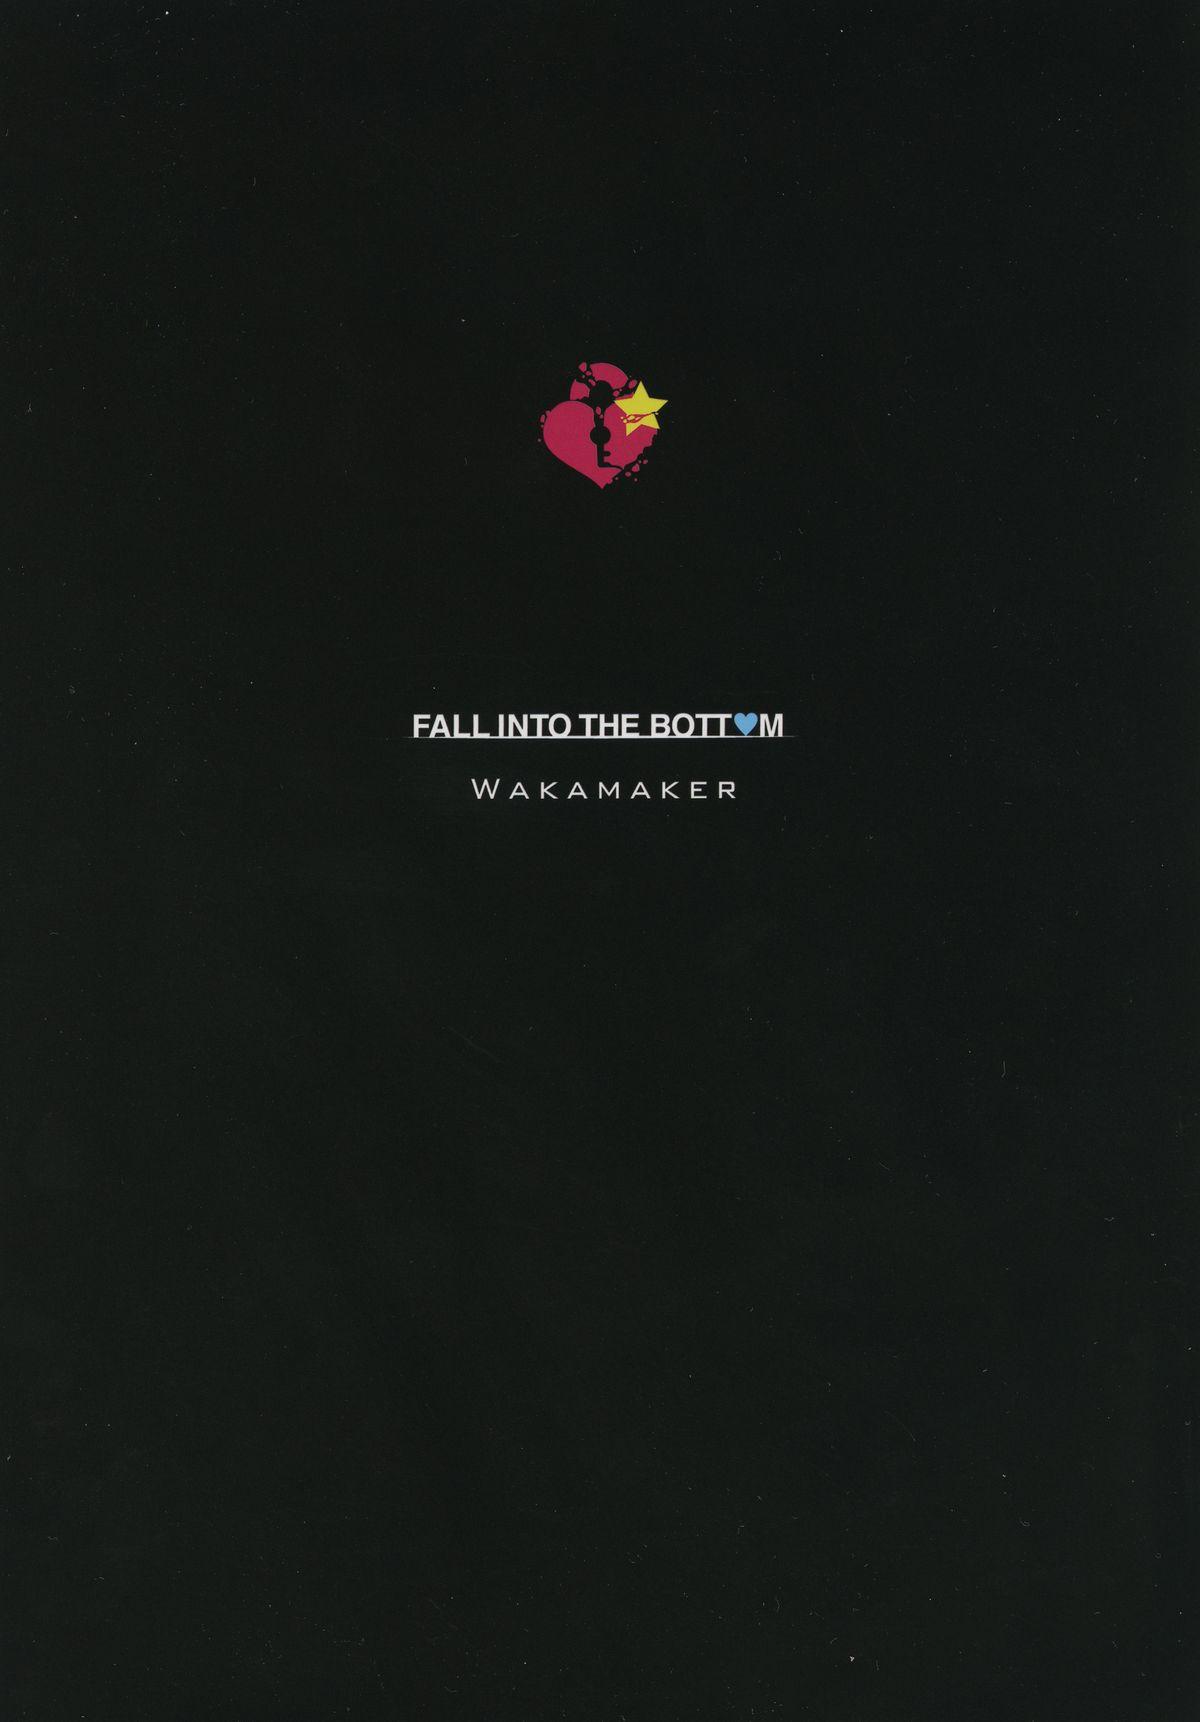 FALL INTO THE BOTTOM 21